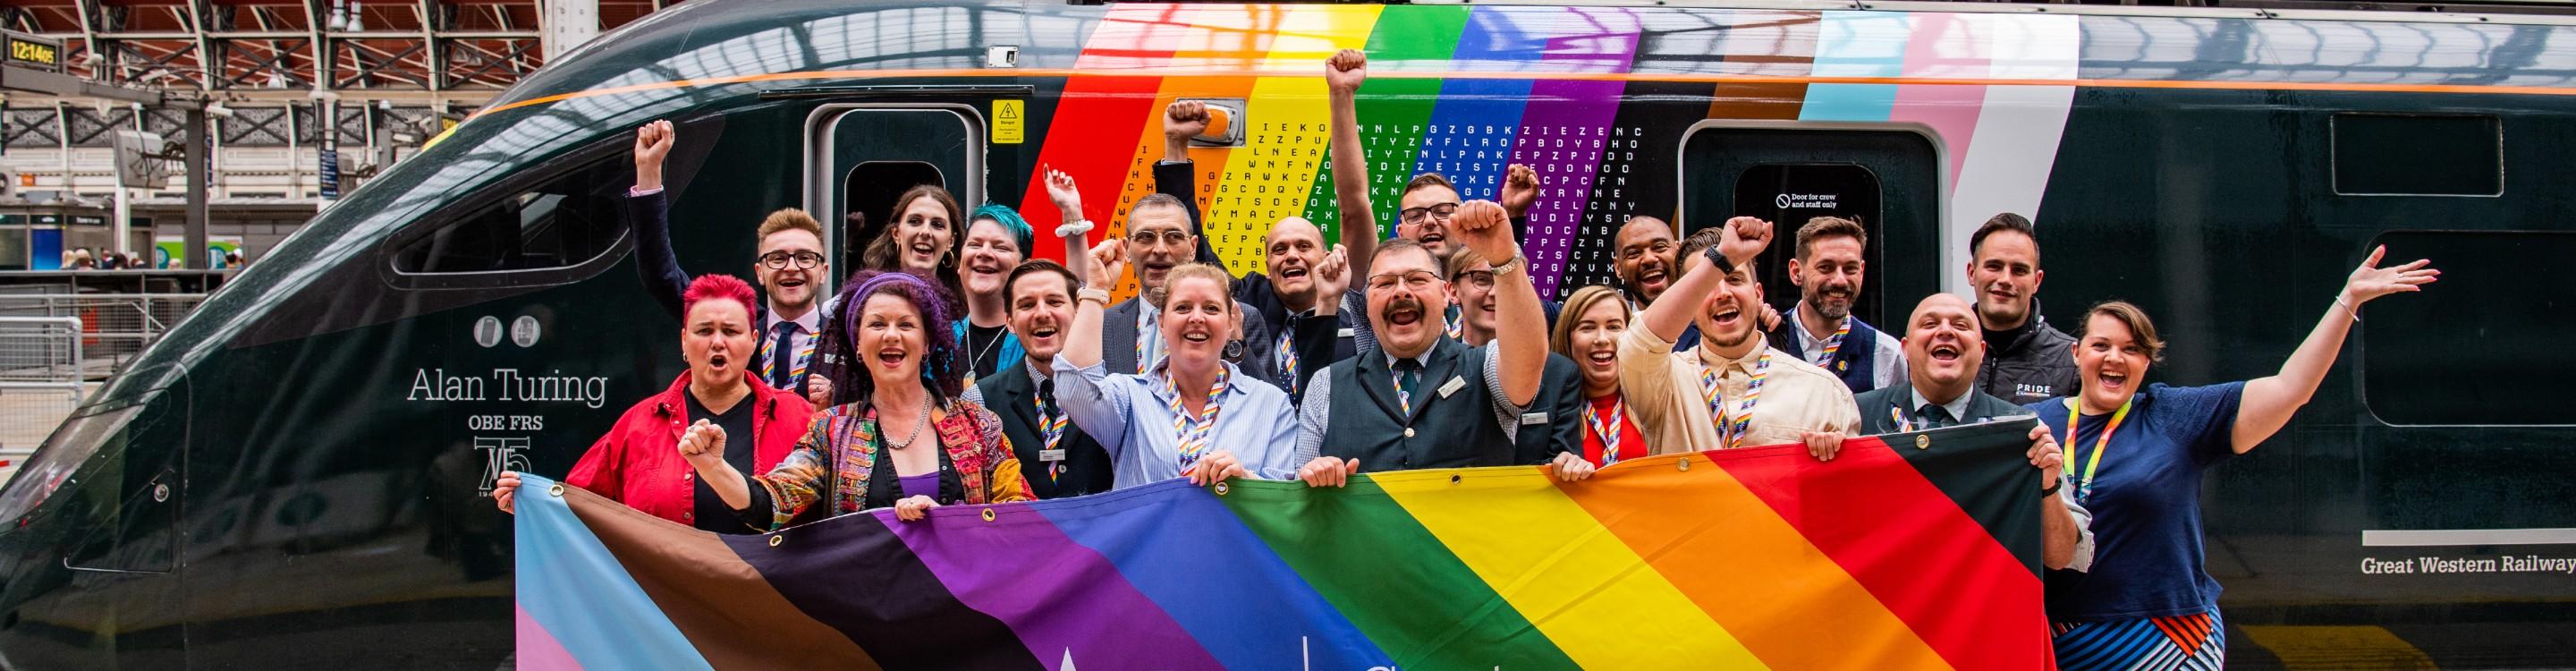 Photo of a cheering crowd on the platform holding a GWR pride rainbow banner in front of the GWR train named for Alan Turing